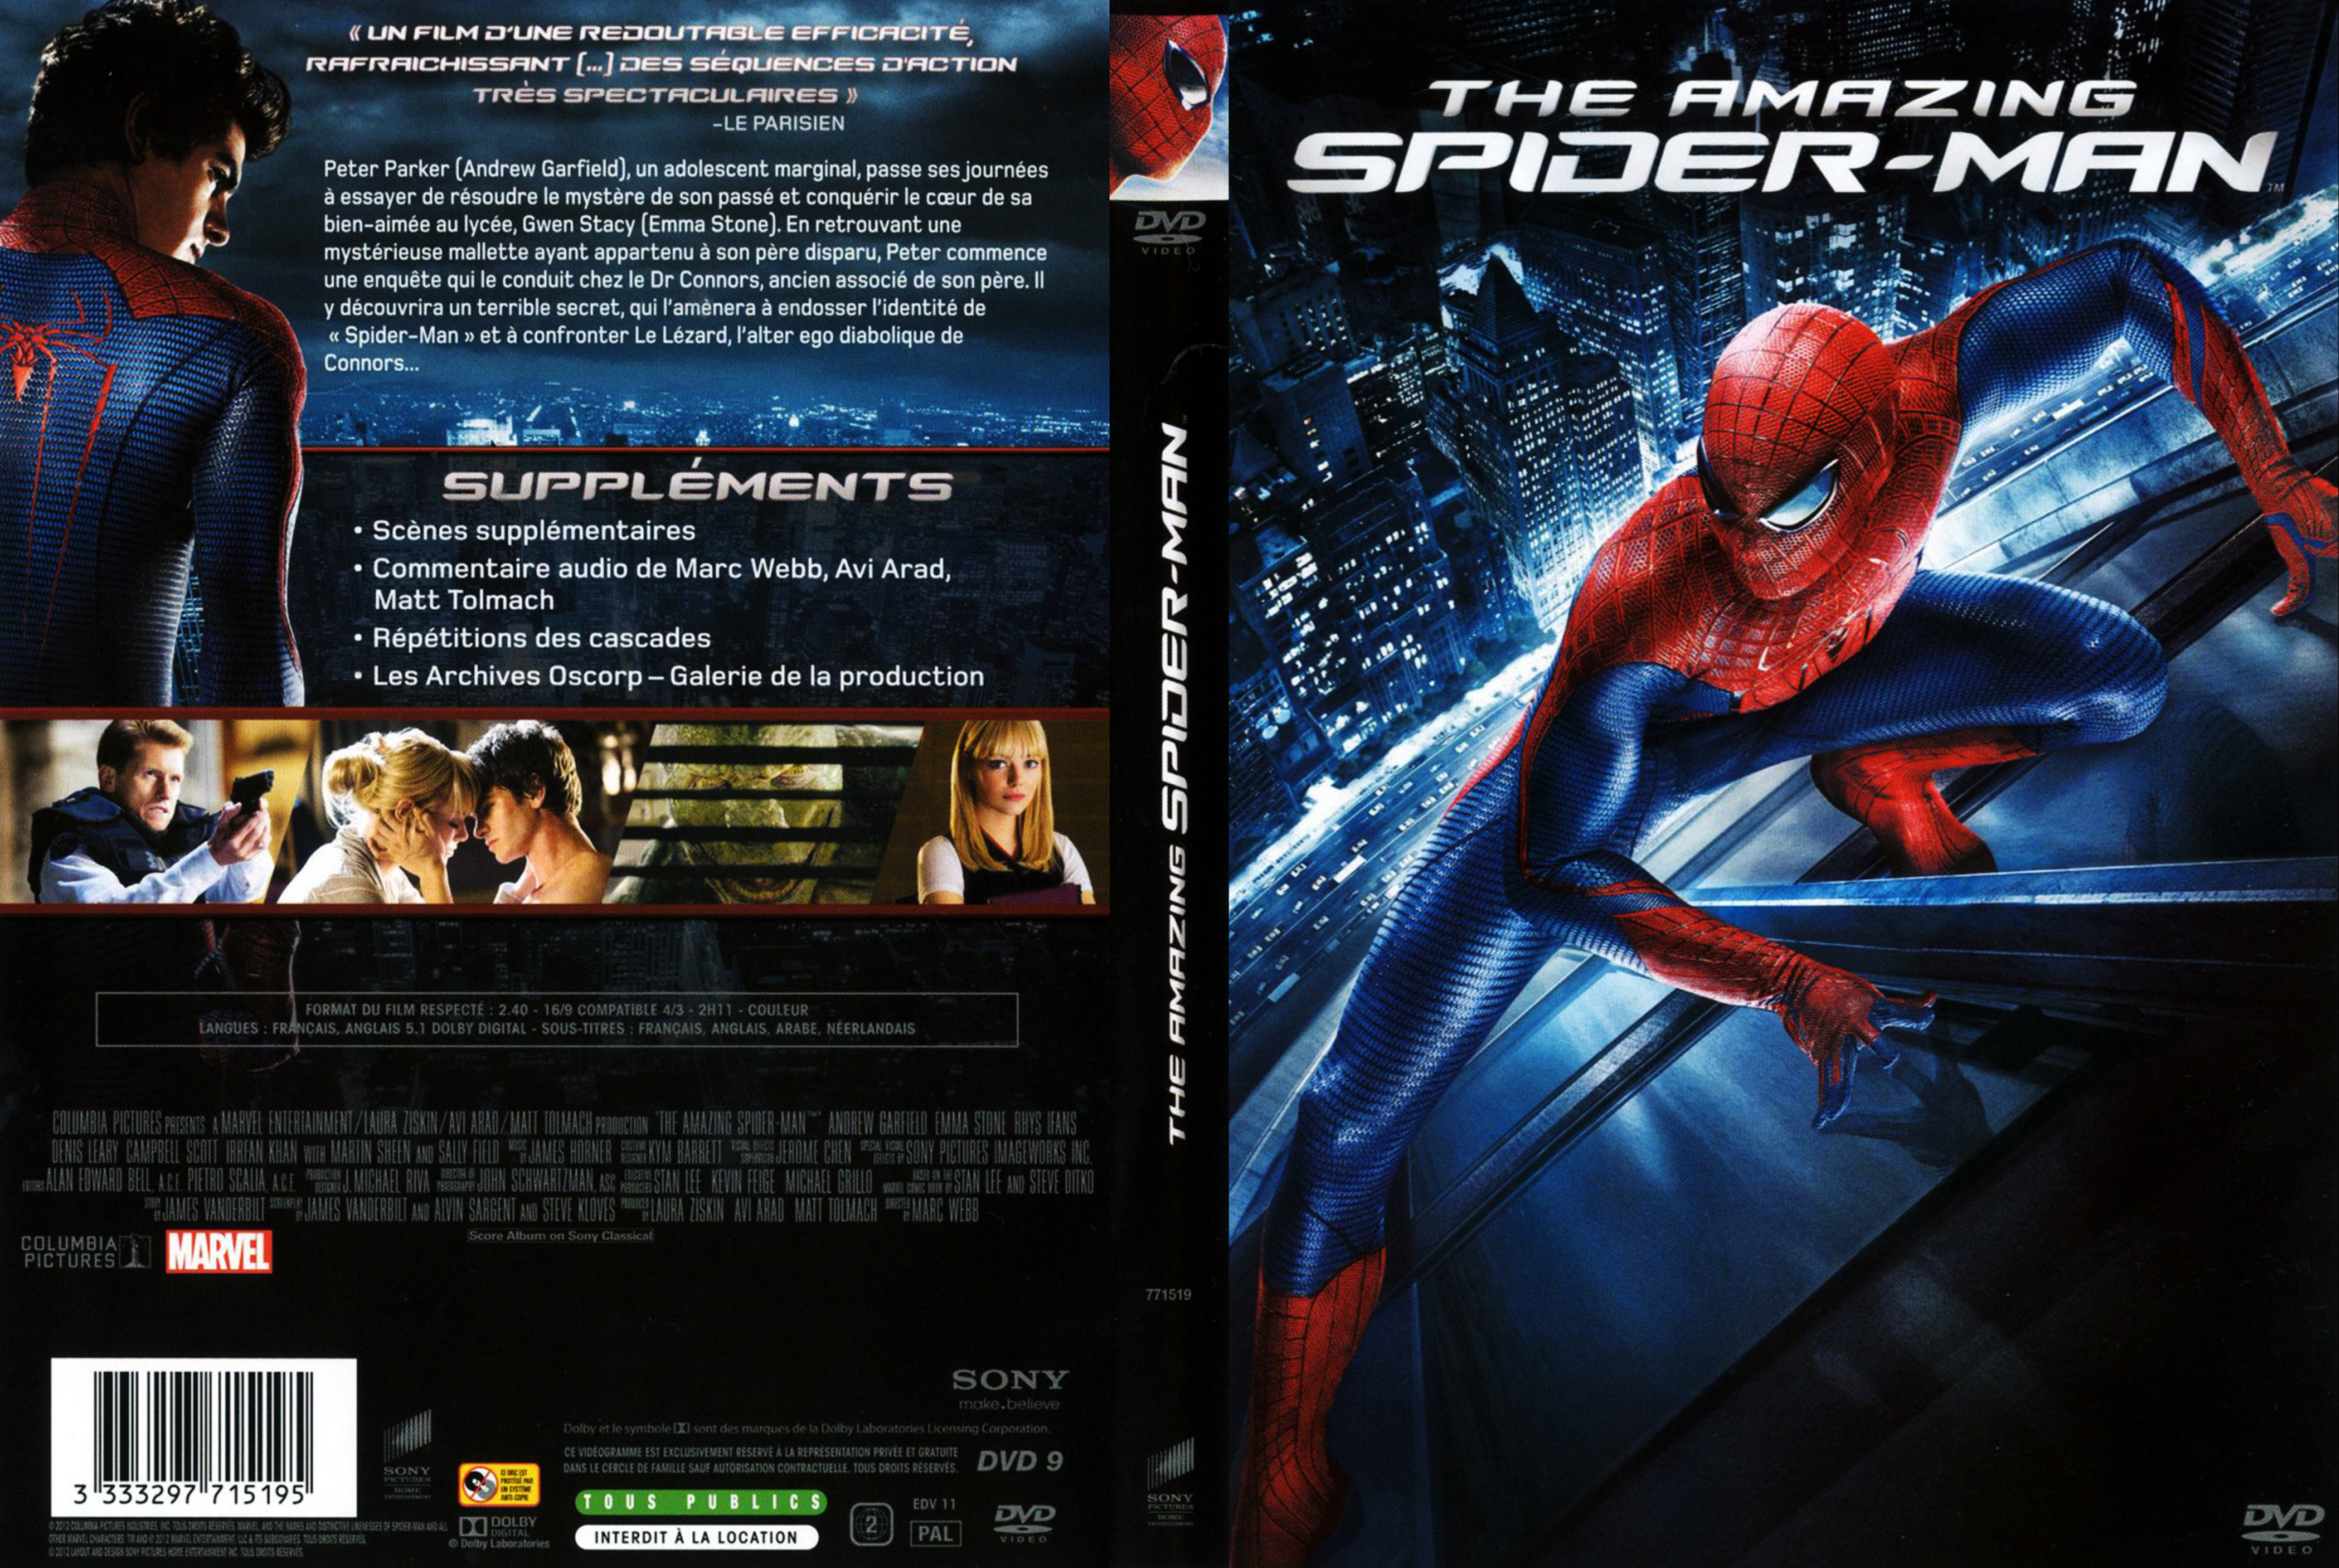 Jaquette DVD The Amazing Spider-Man